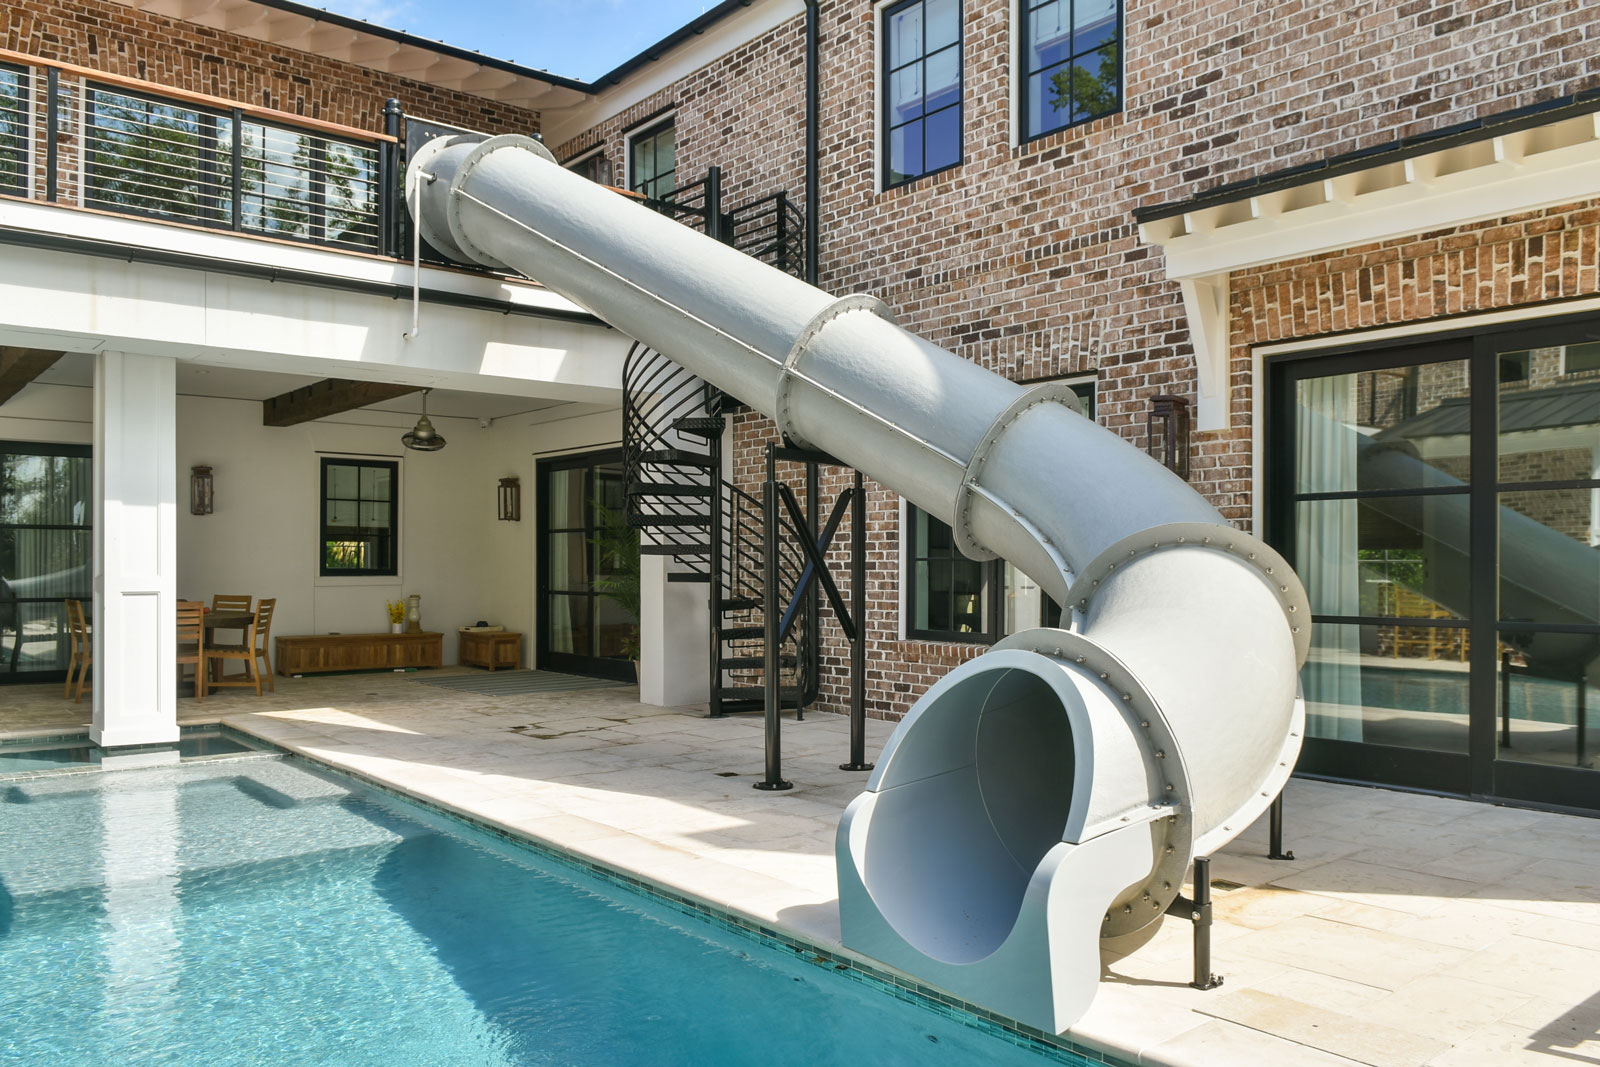 Pool courtyard with two story slide